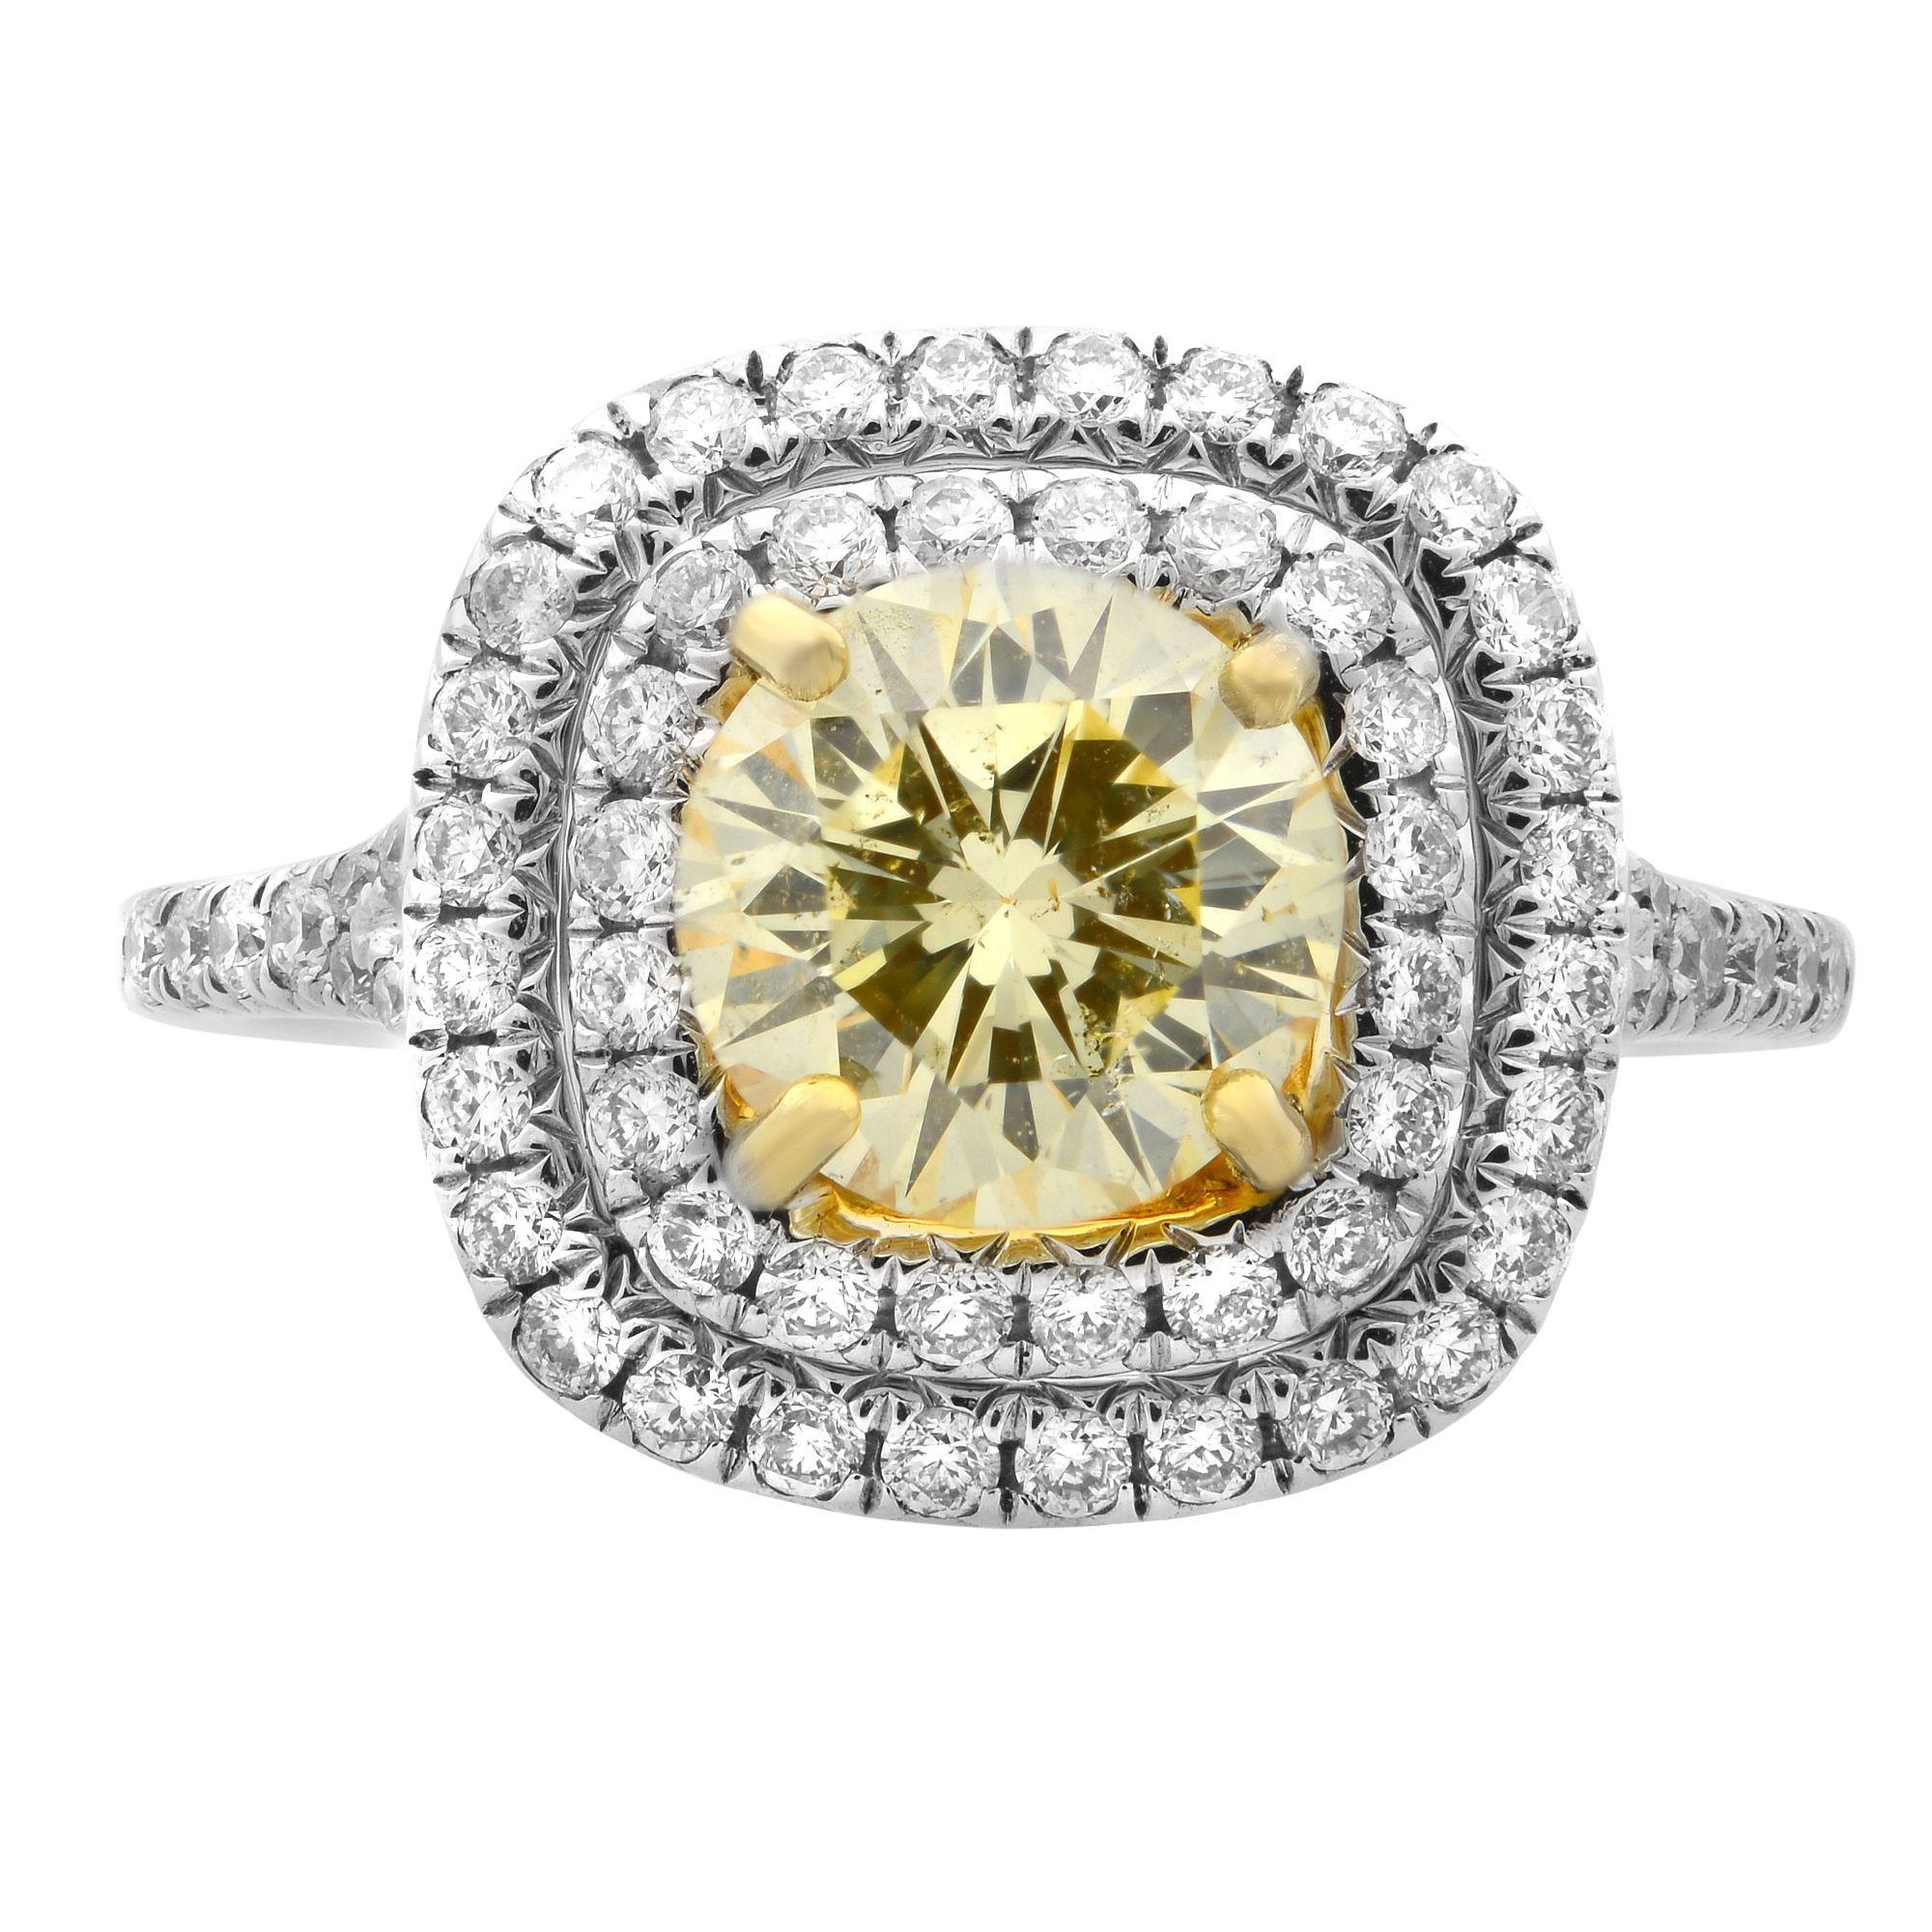 A cushion diamond double halo ring with a light fancy yellow round cut center stone, certified by GIA, center stone weighting 1.13 carat. Side diamonds weighting 0.55 carat. The ring is mounted in 18K white and yellow gold, with collection color